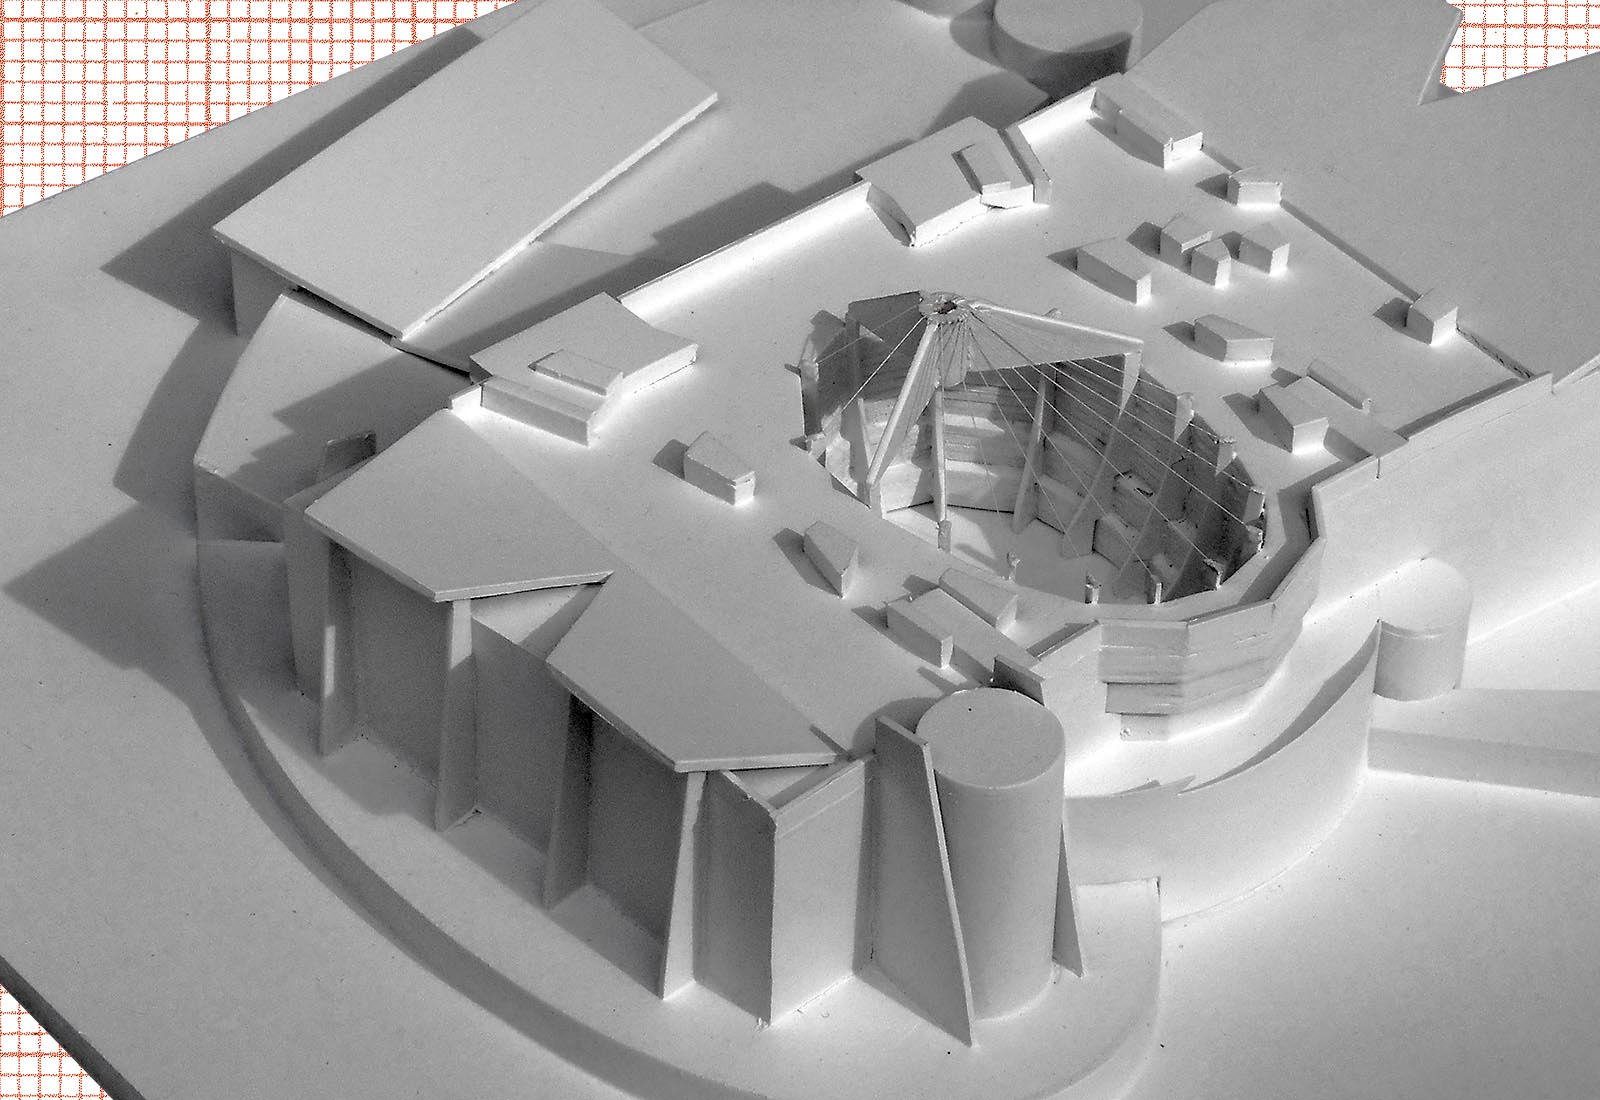 Leisure center in Rho - View of the model